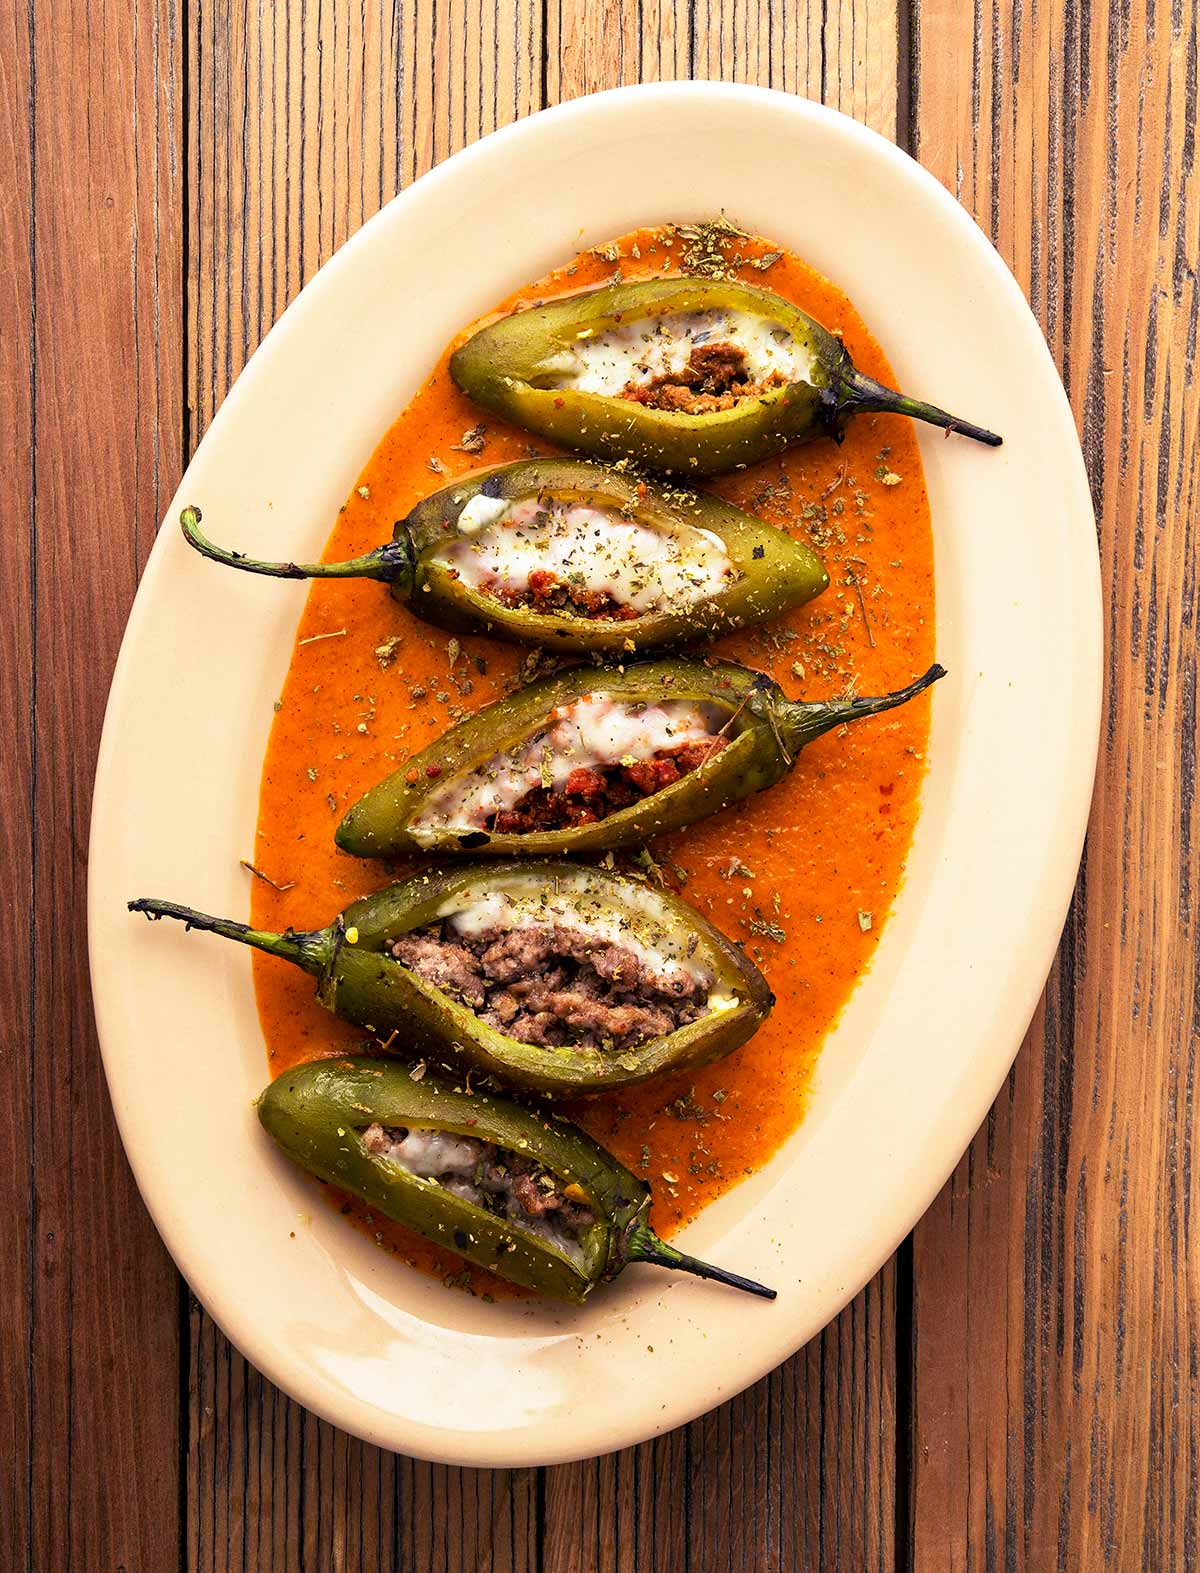 A platter of sausage stuffed peppers